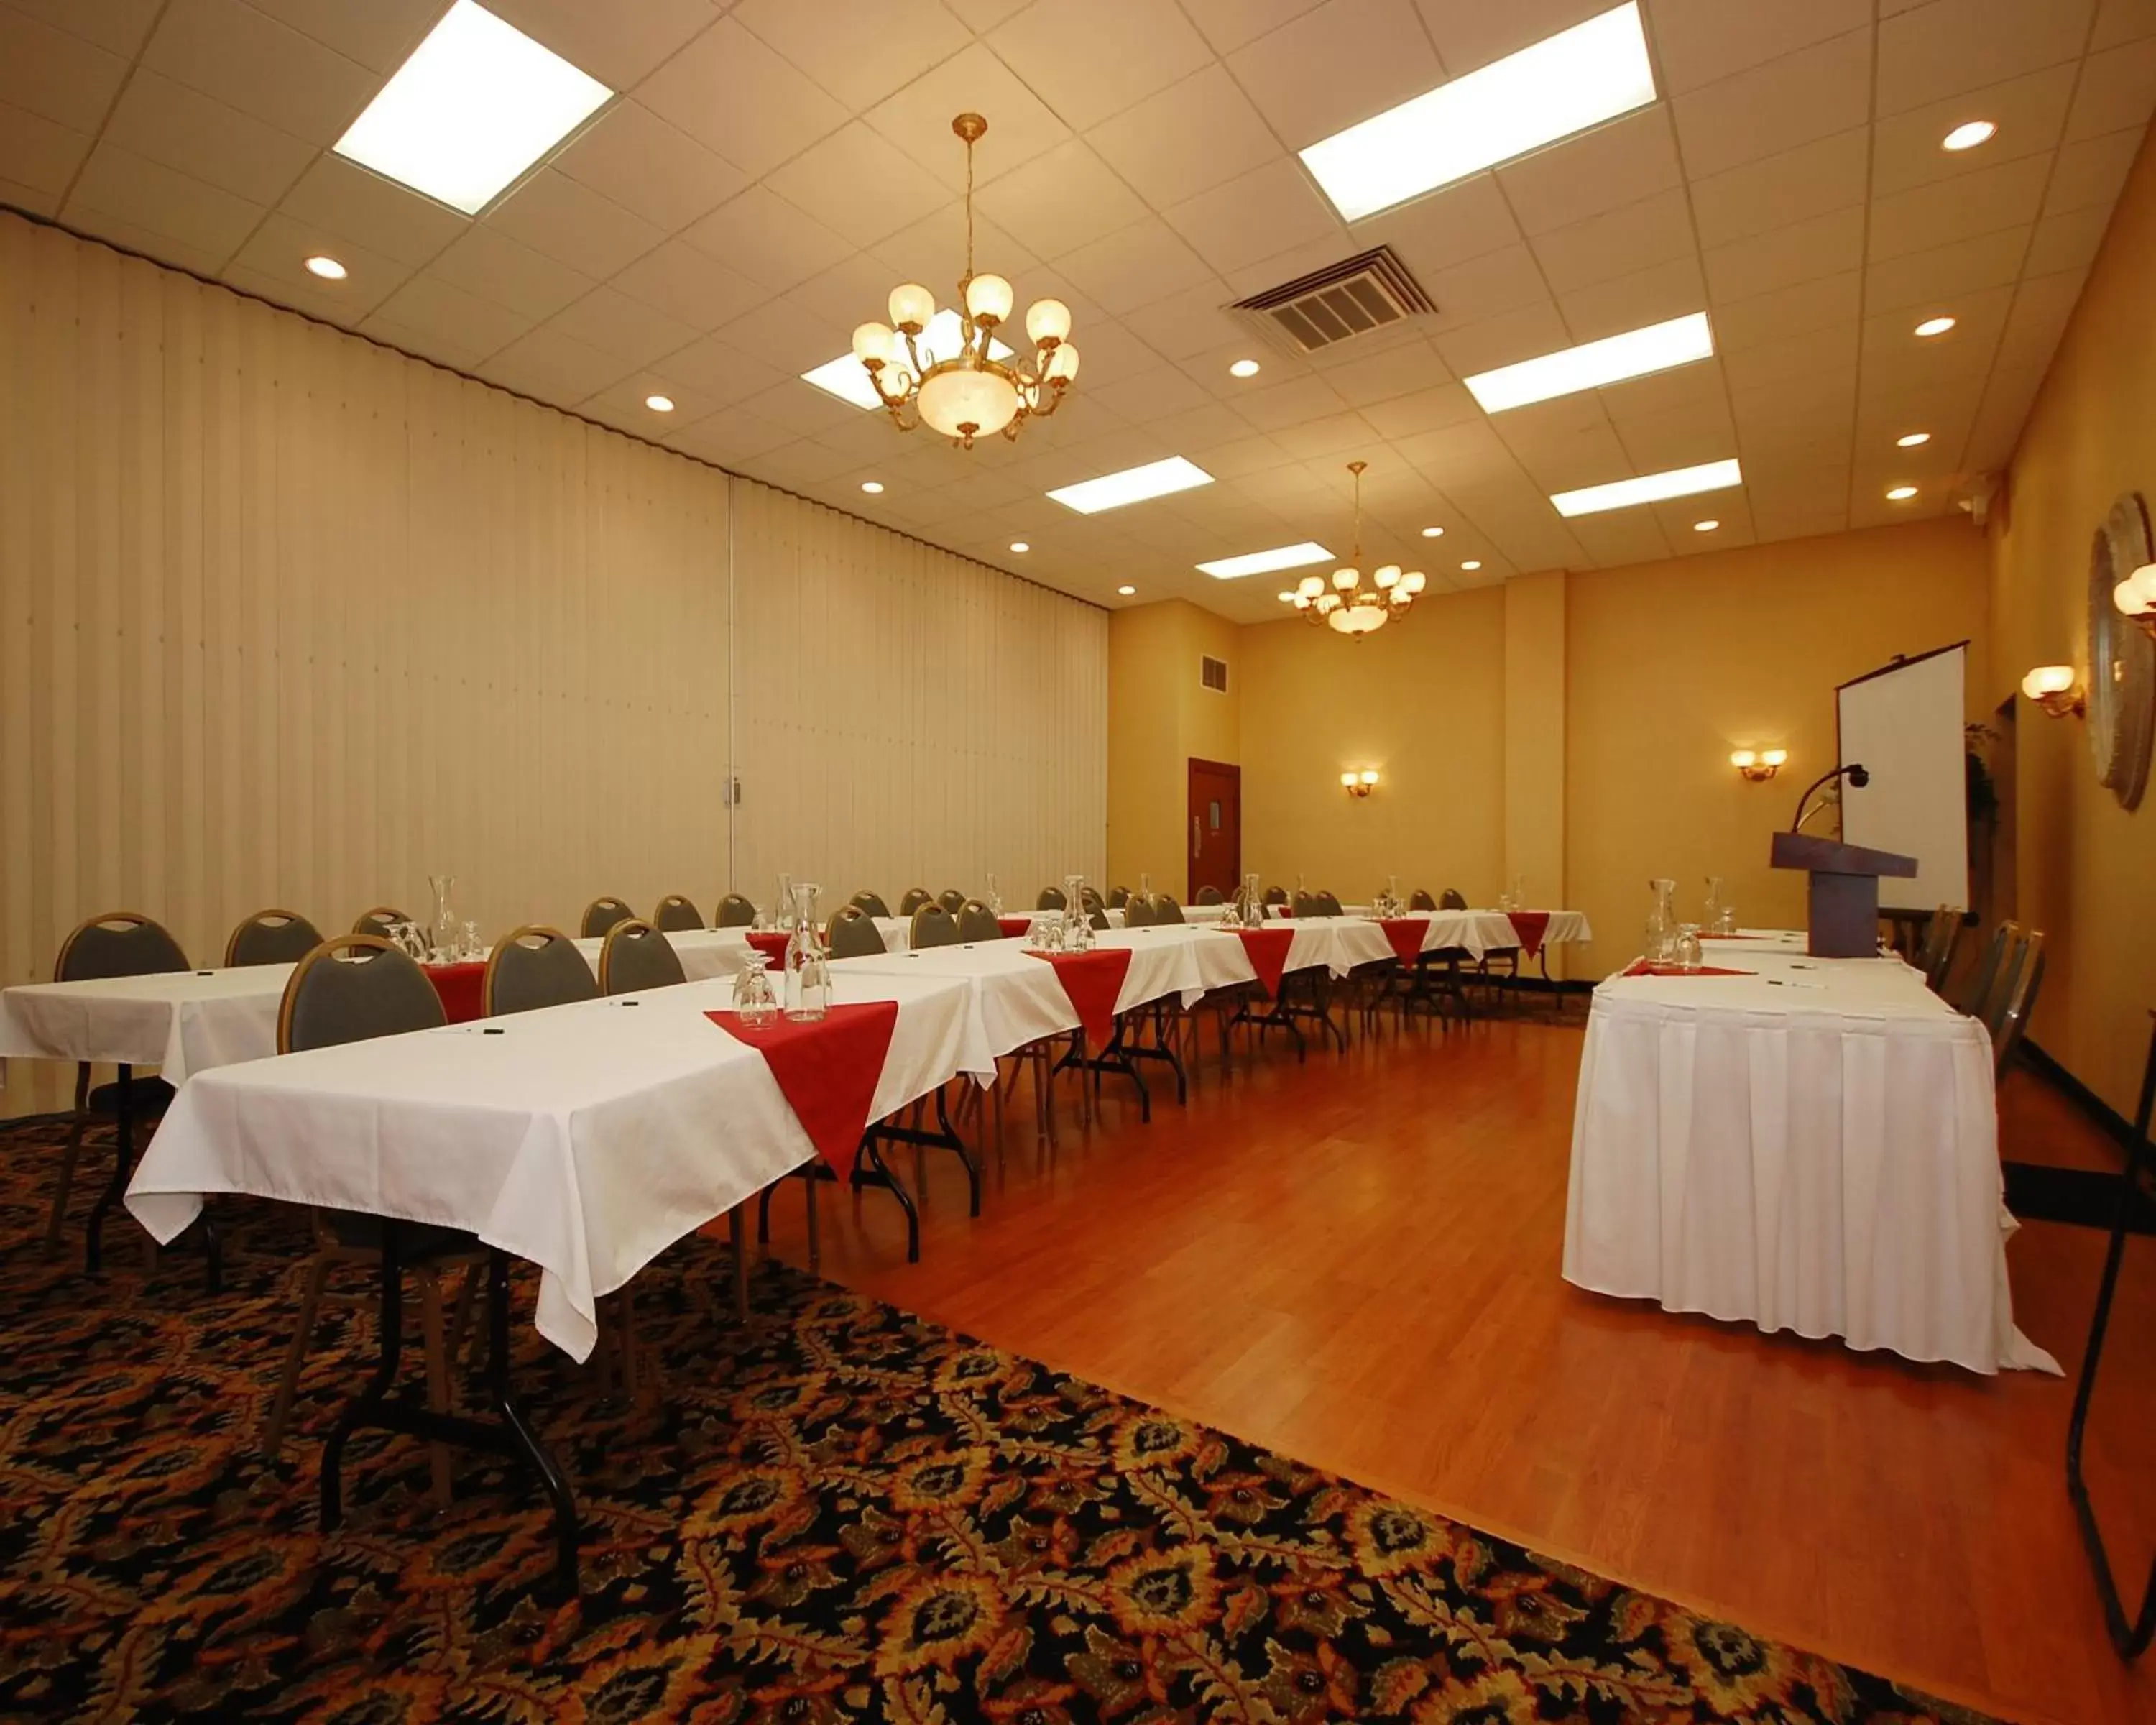 Business facilities in Quality Inn Shenandoah Valley